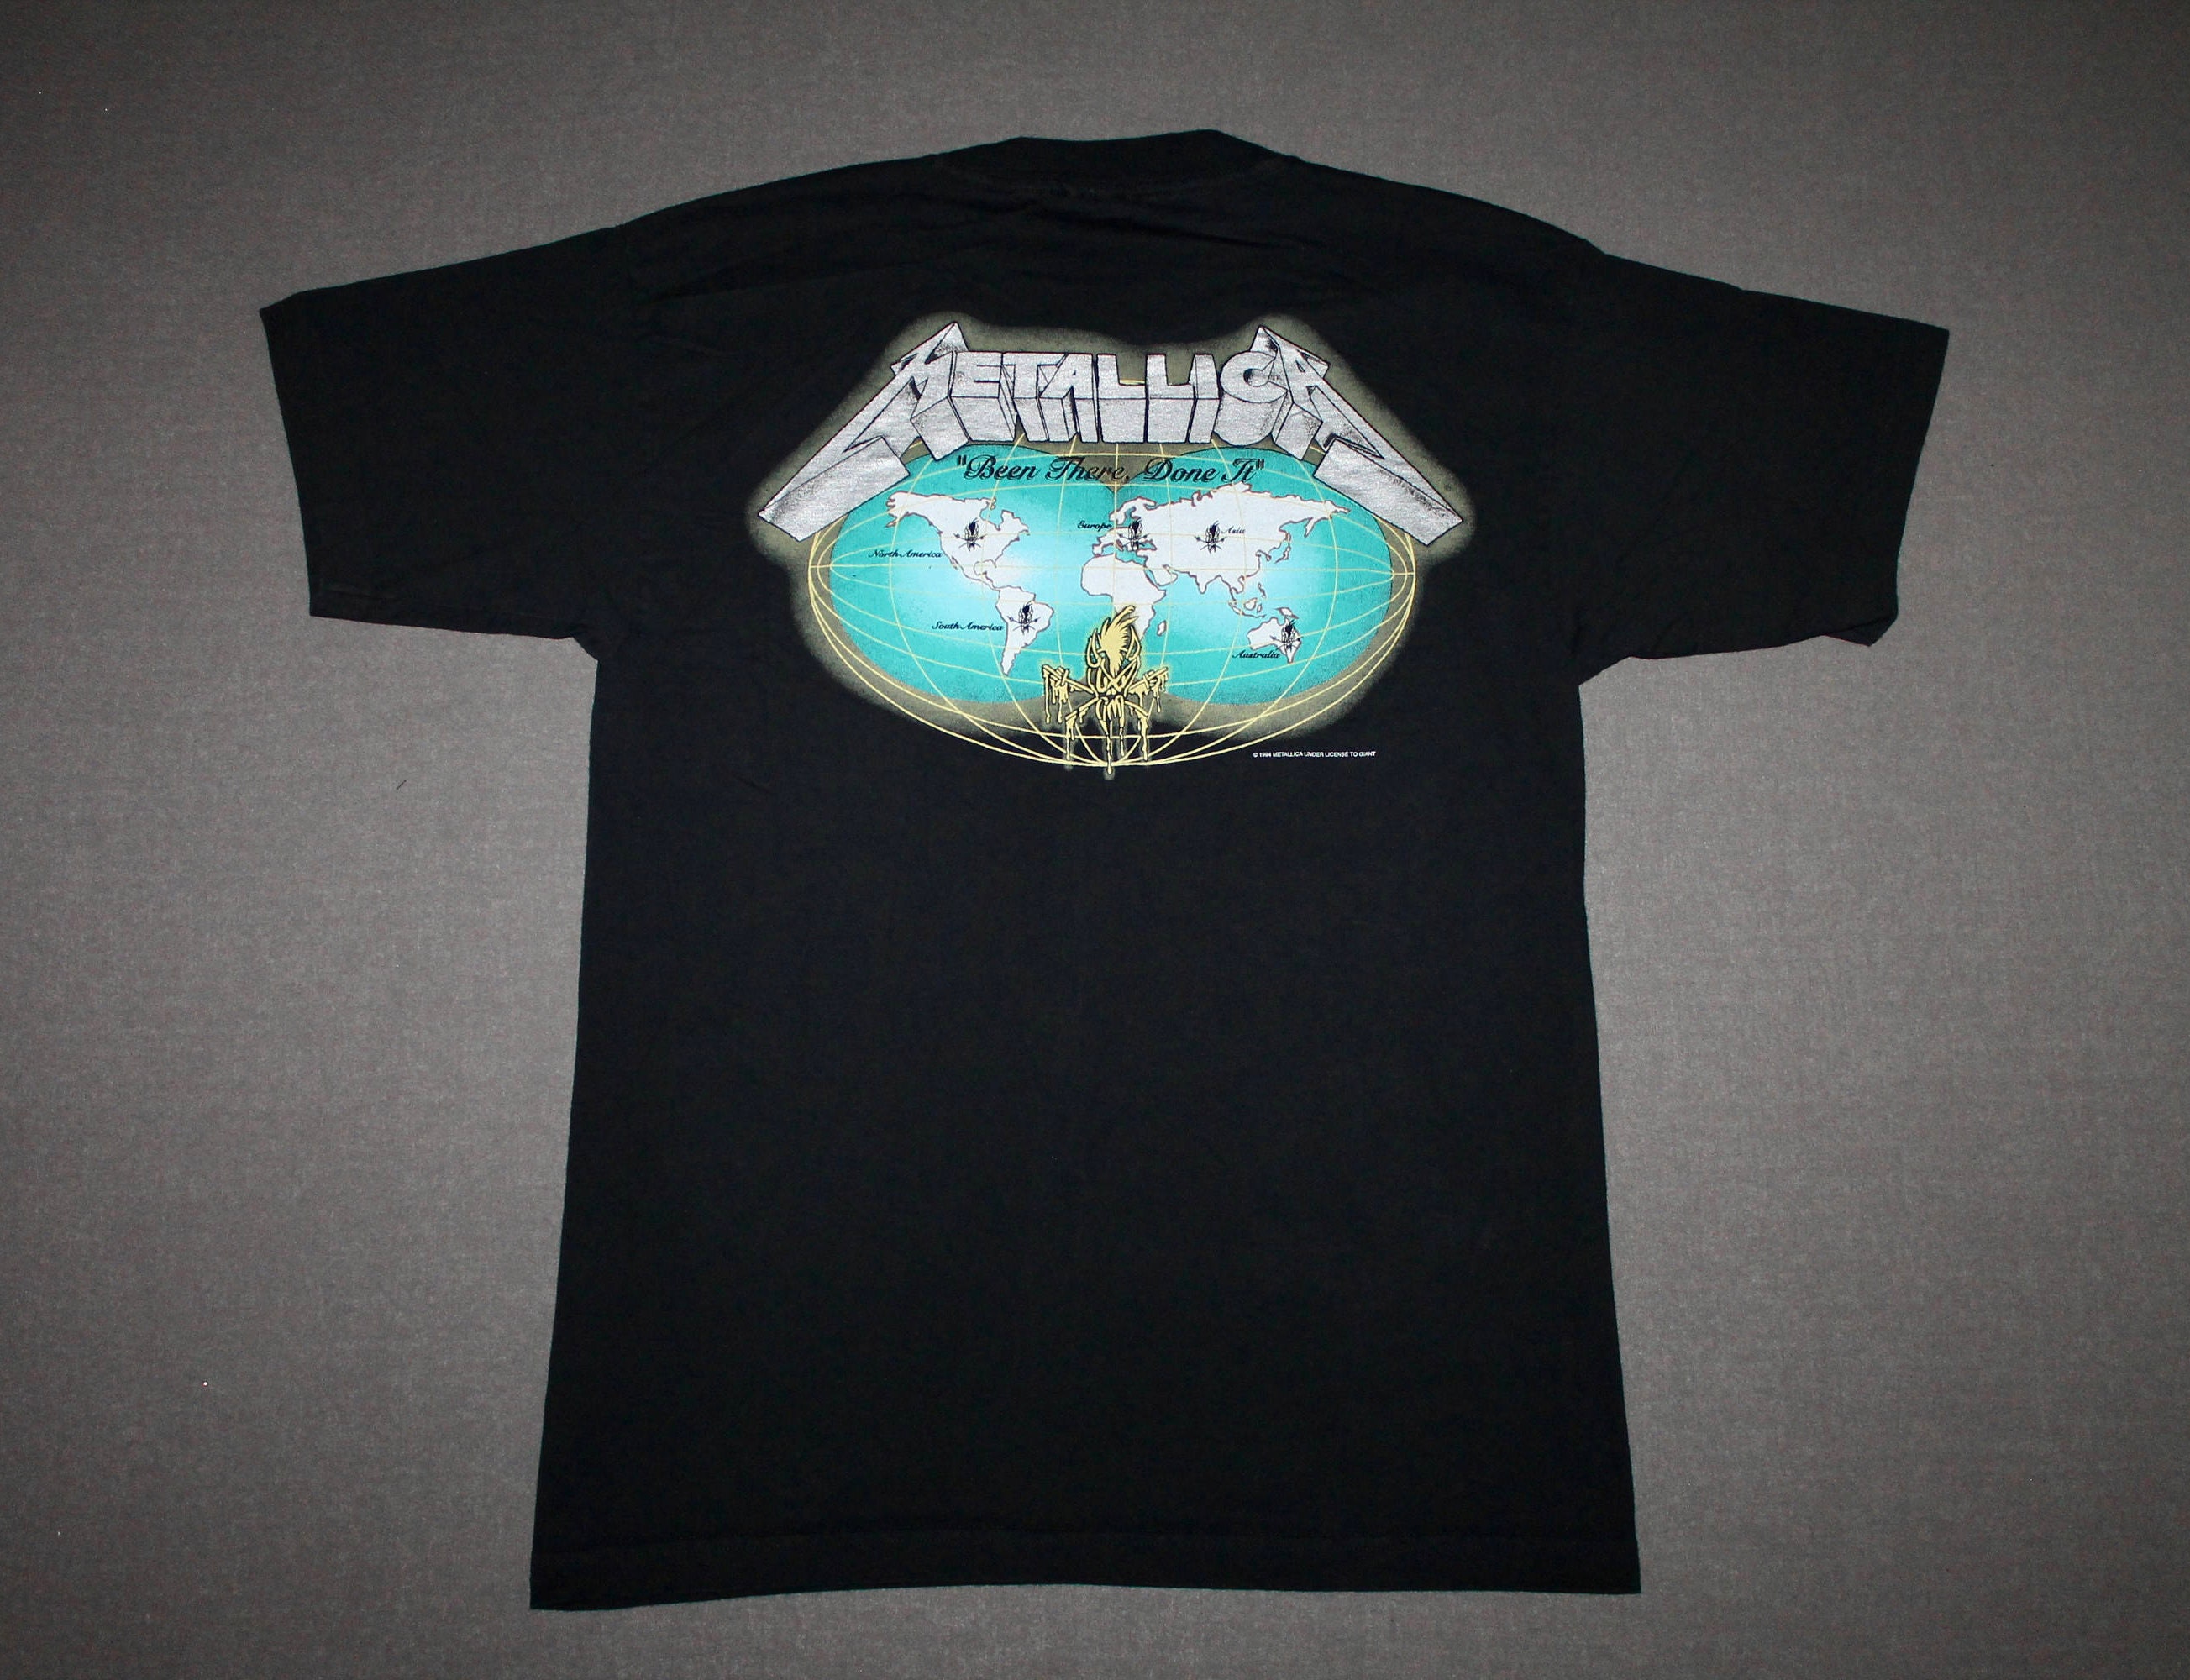 XL * vtg 90s 1995 METALLICA been there done that tour t shirt